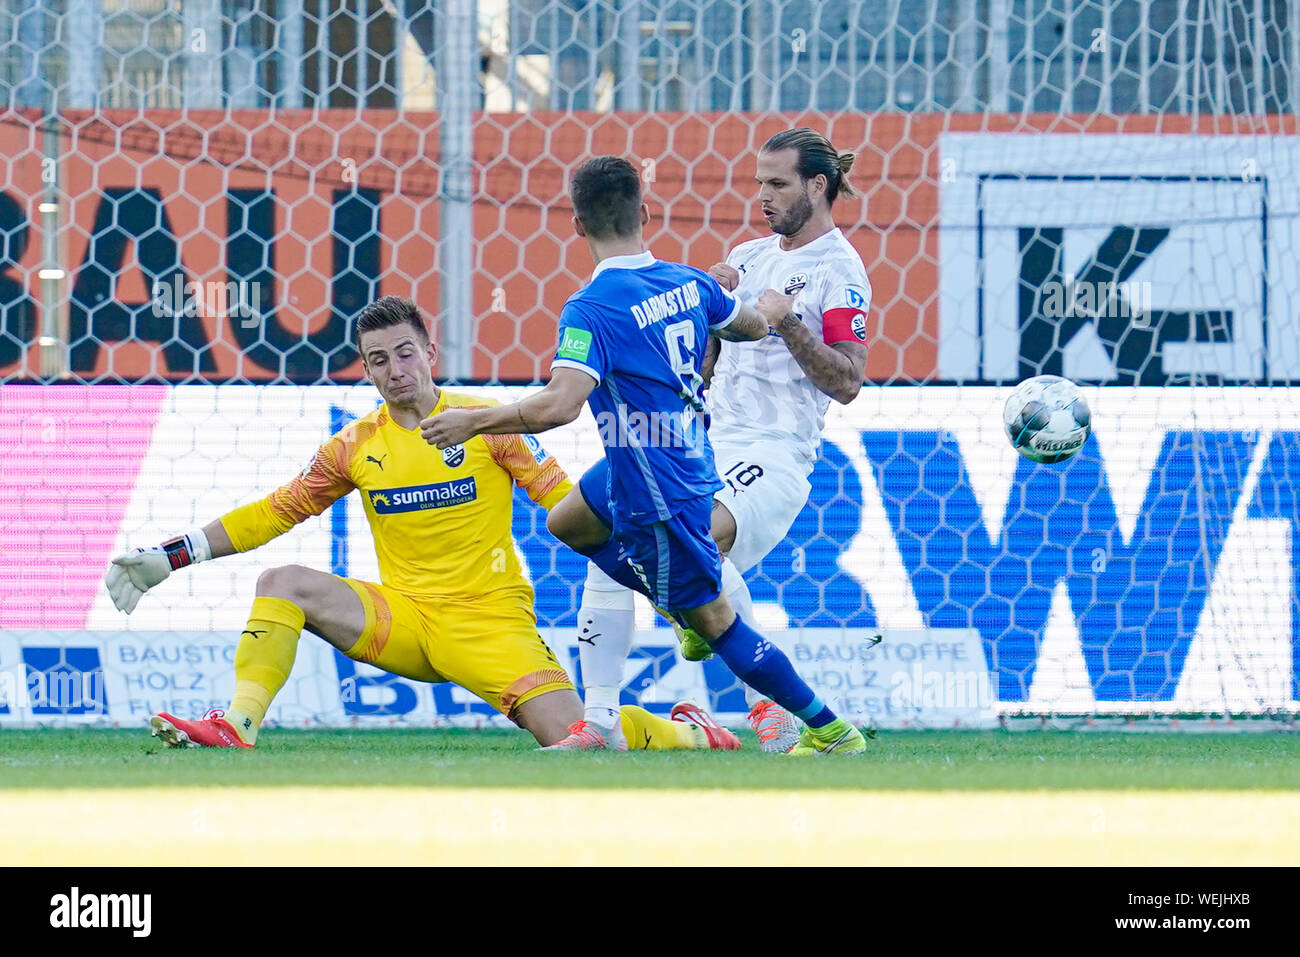 Sandhausen, Germany. 30th Aug, 2019. Soccer: 2nd Bundesliga, SV Sandhausen - SV Darmstadt 98, 5th matchday, in Hardtwaldstadion. Darmstadt's Marvin Mehlem (M) fails because of Sandhausen's goalkeeper Martin Fraisl (l) and Sandhausen's Dennis Diekmeier. Credit: Uwe Anspach/dpa - IMPORTANT NOTE: In accordance with the requirements of the DFL Deutsche Fußball Liga or the DFB Deutscher Fußball-Bund, it is prohibited to use or have used photographs taken in the stadium and/or the match in the form of sequence images and/or video-like photo sequences./dpa/Alamy Live News Stock Photo